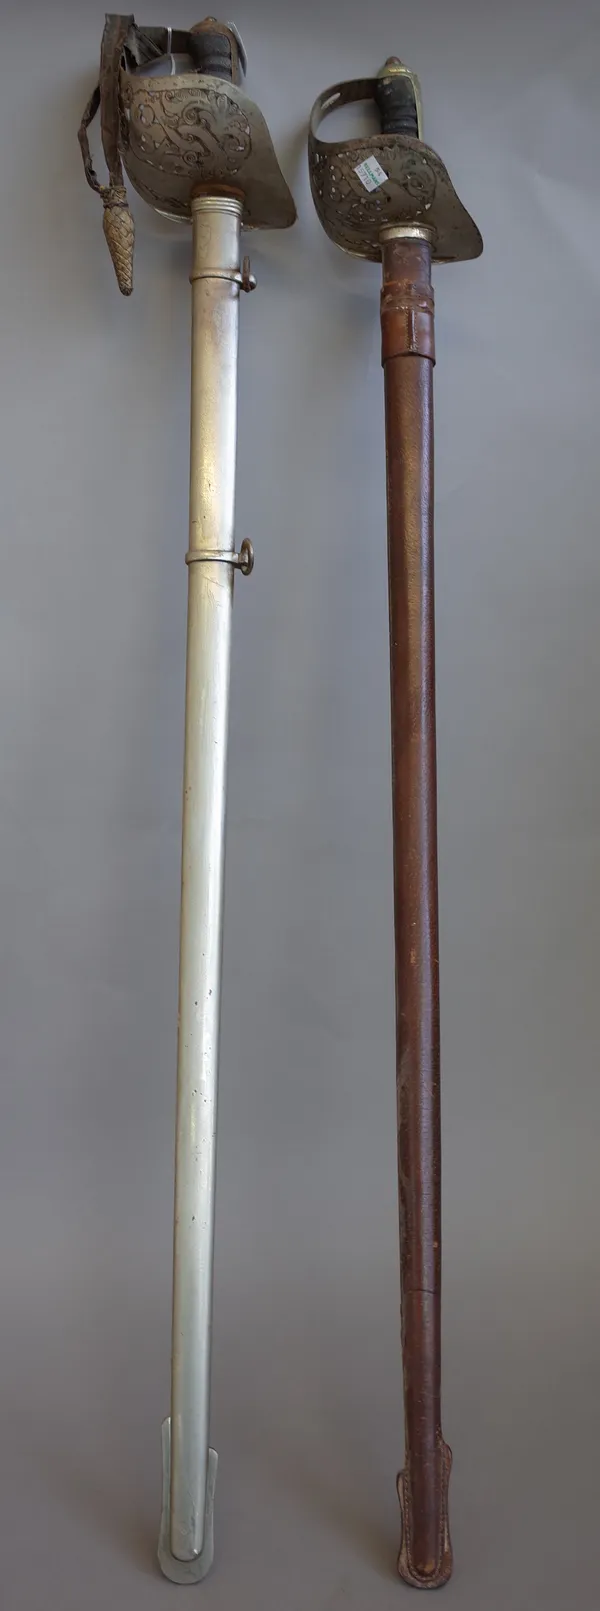 A George V Officer's dress sword and an Edwardian VII Officer's dress sword by 'Henley Brooks Ltd', each with engraved blade and scabbard, (2).